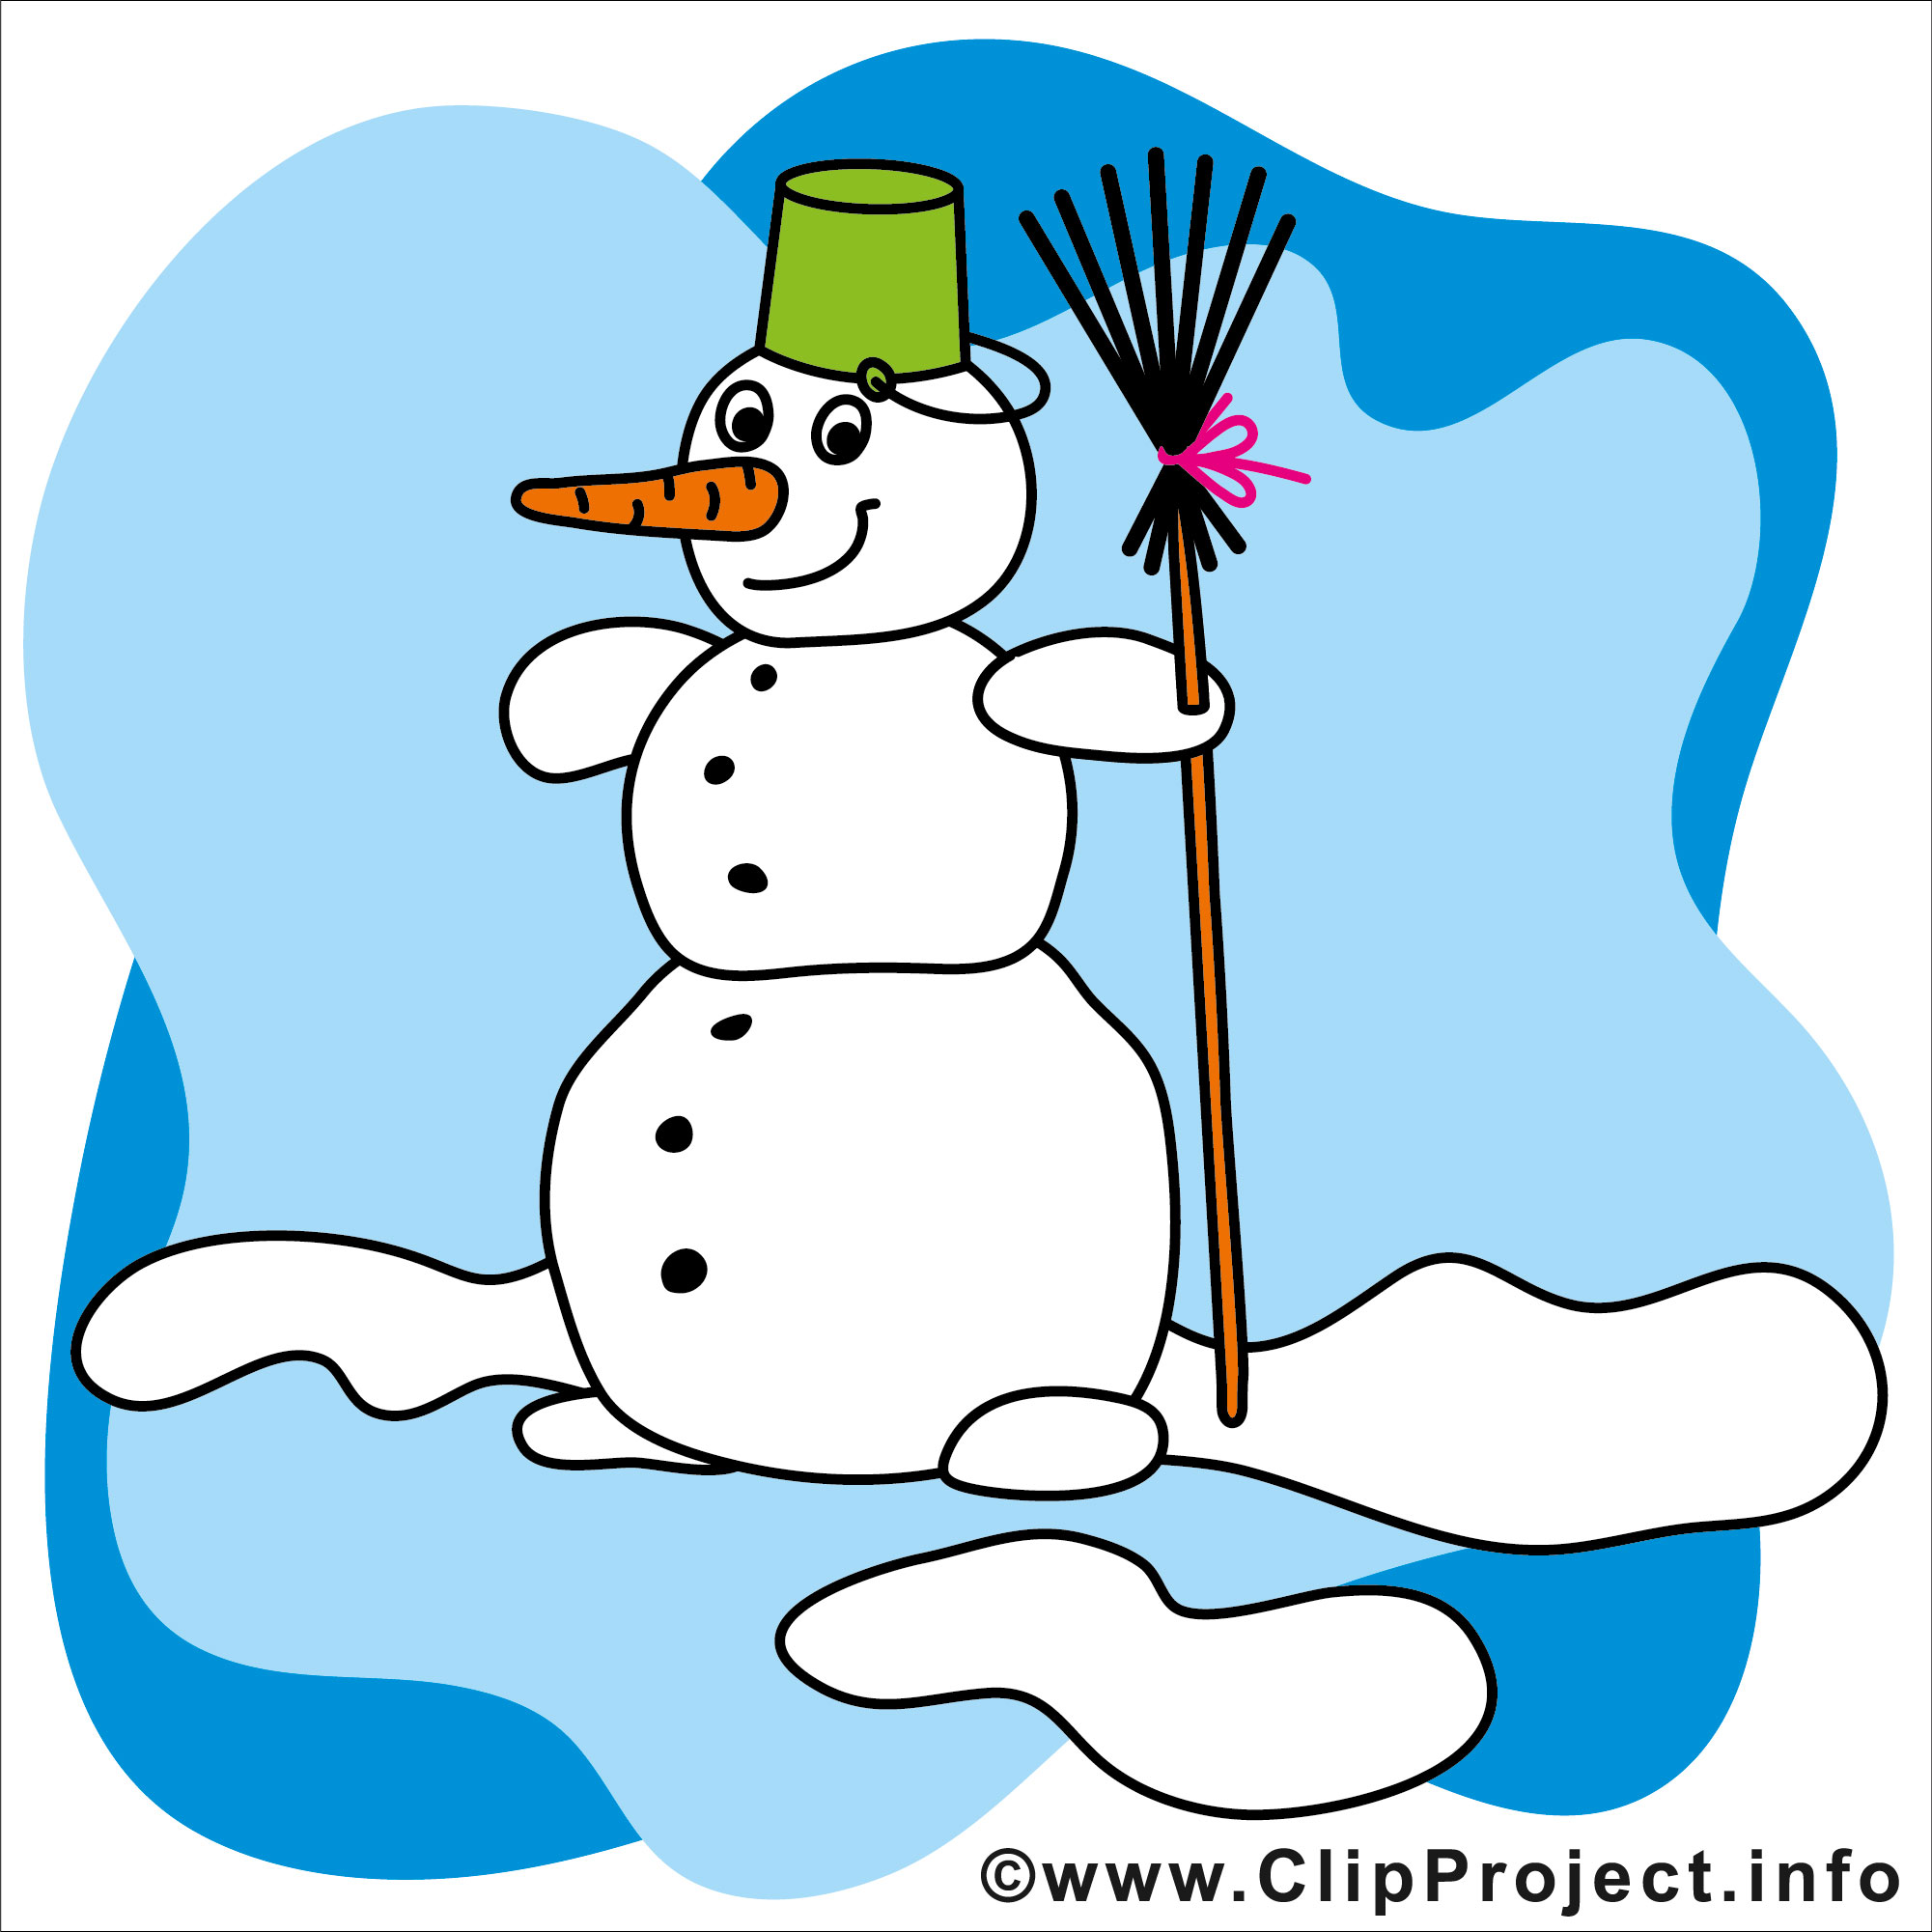 Winter clip art images in high resolution for free